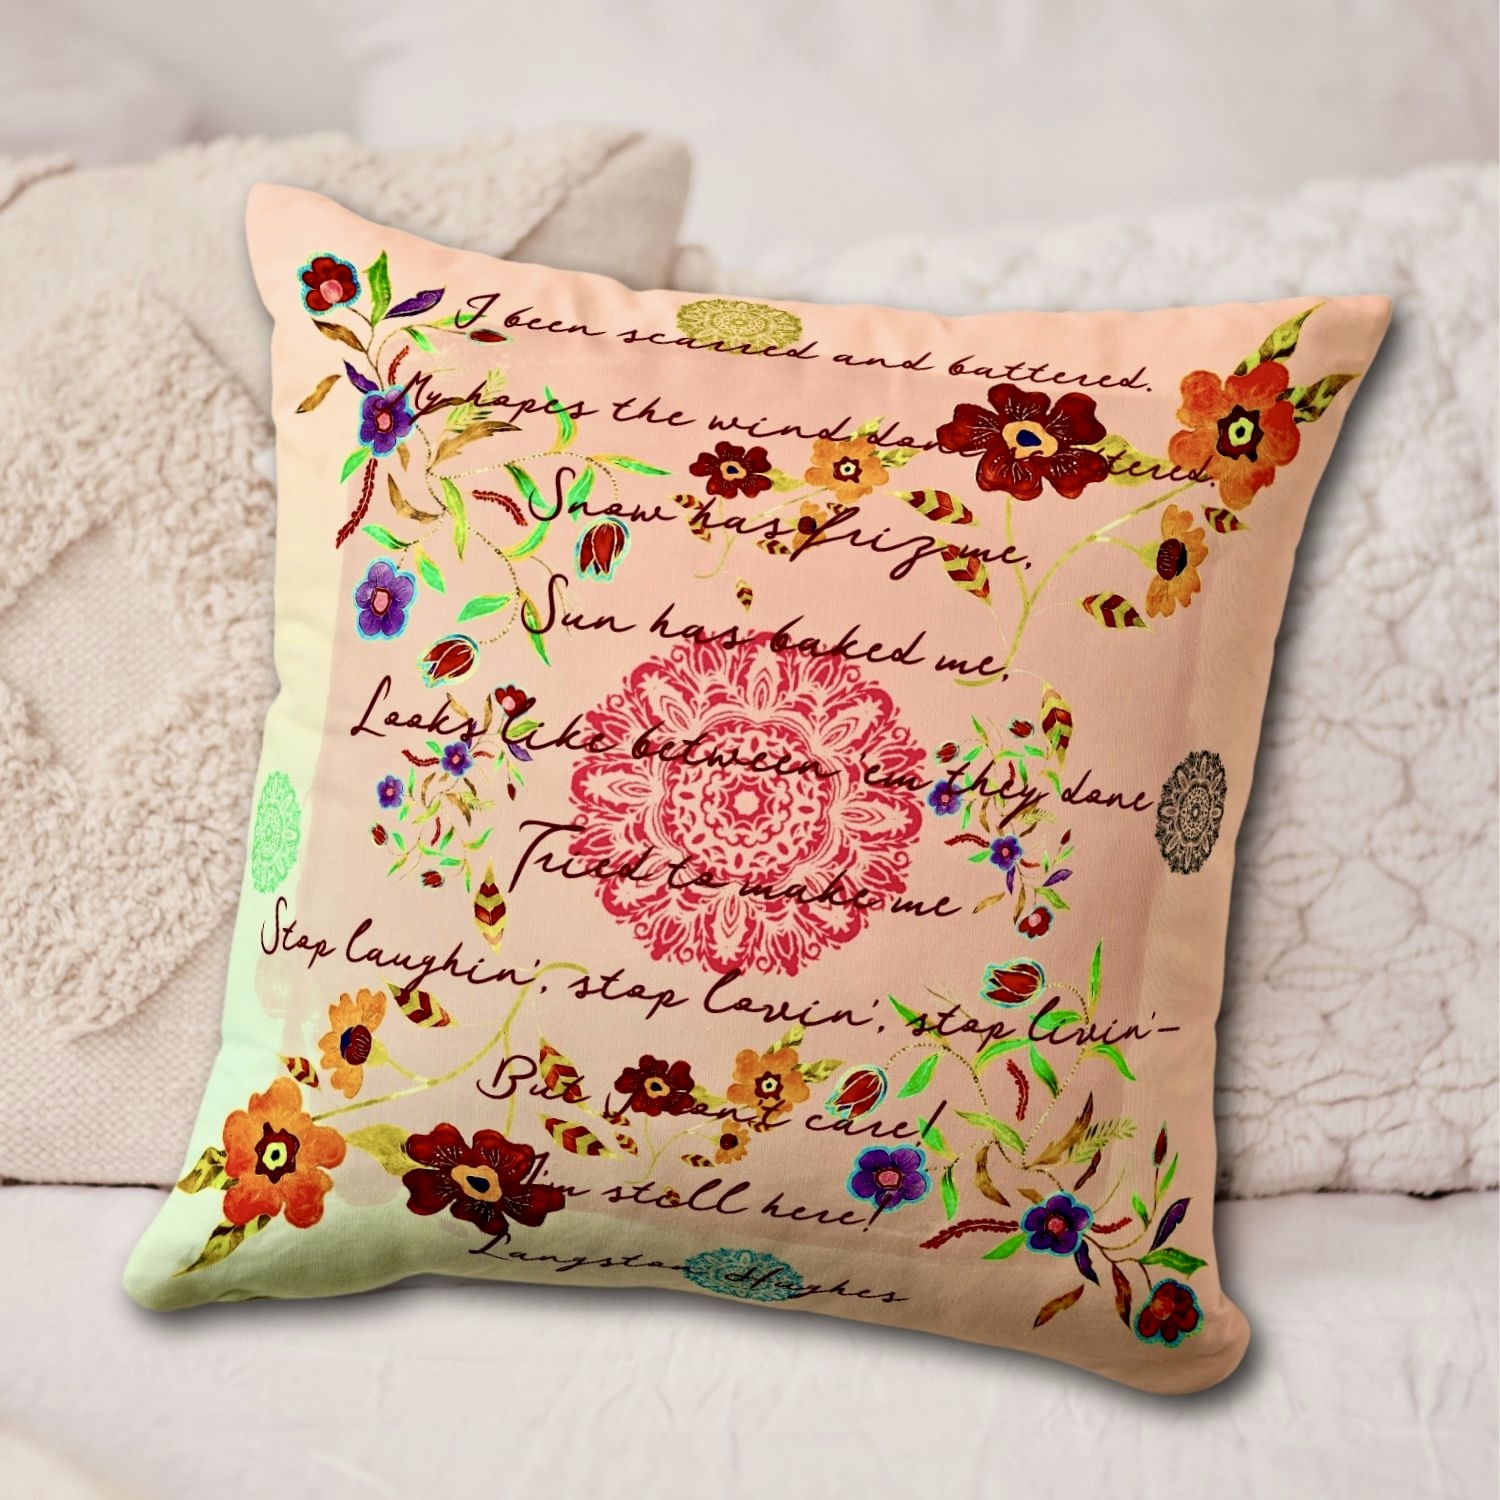 Decorative throw pillow adorned with intricate watercolor flower designs and a coral-toned mandala, featuring a portion of Langston Hughes' poem 'Still Here' for added literary inspiration.